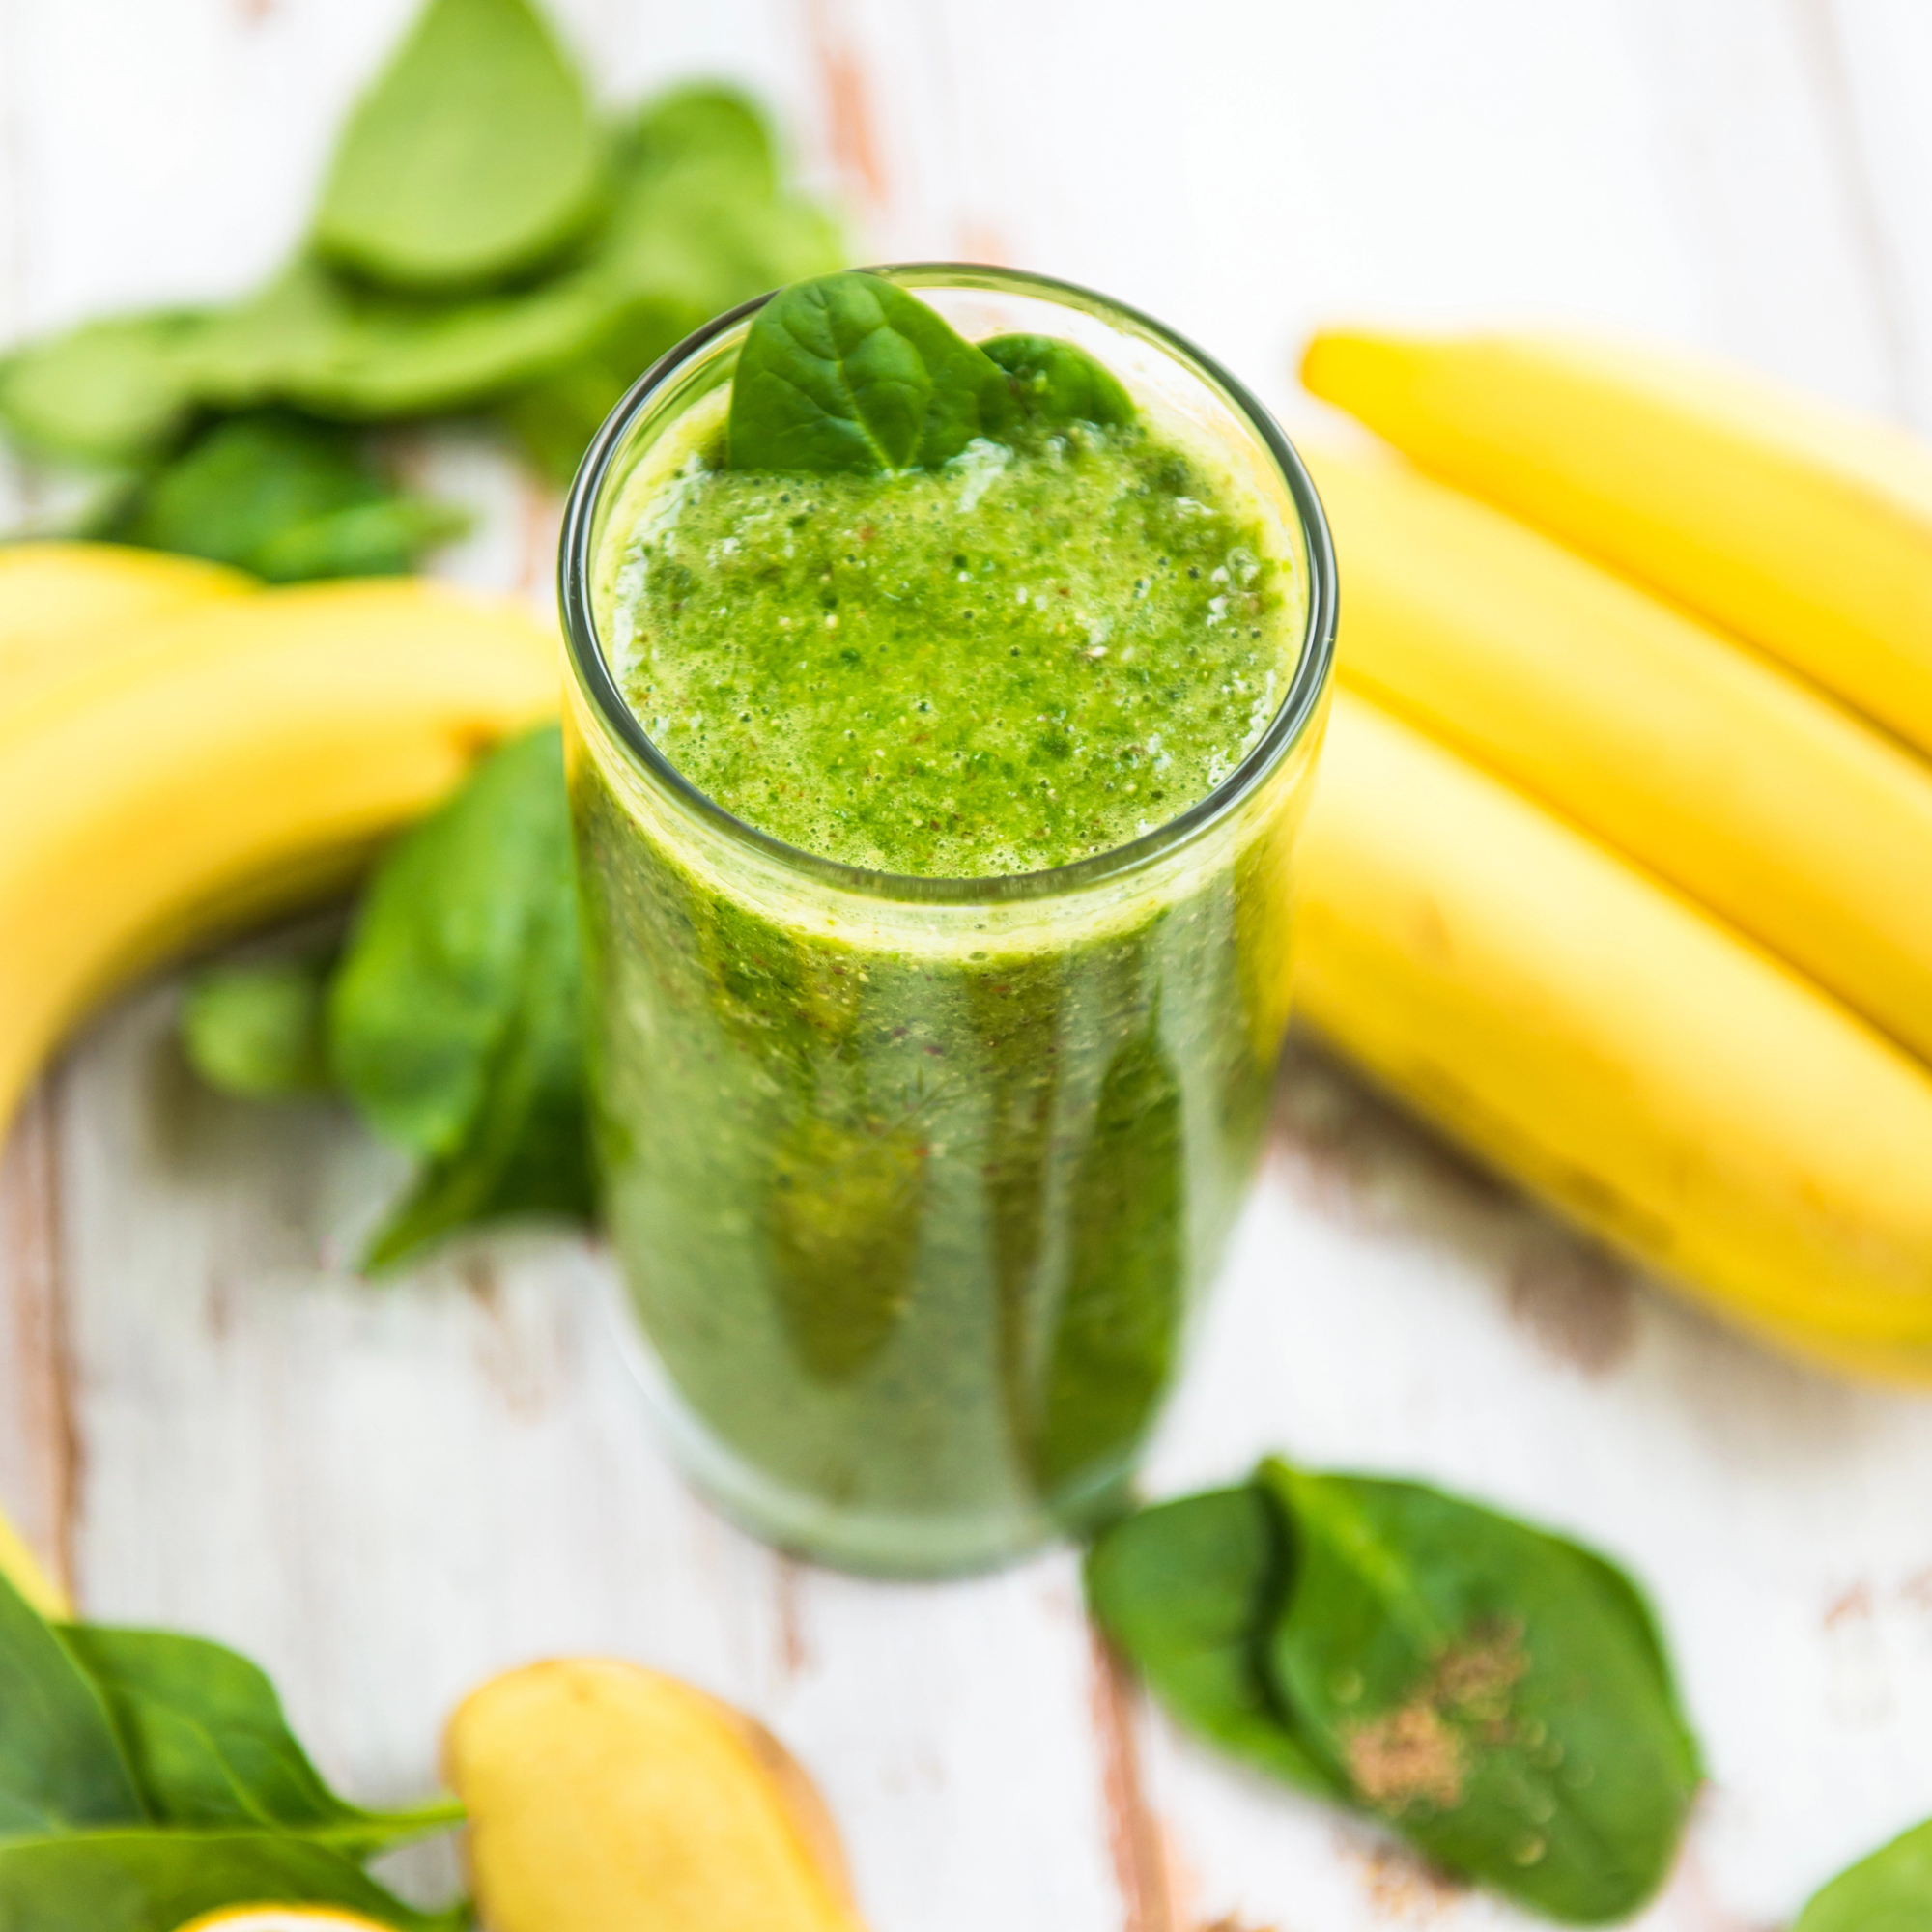 Banana spinach smoothie in a glass next to bananas